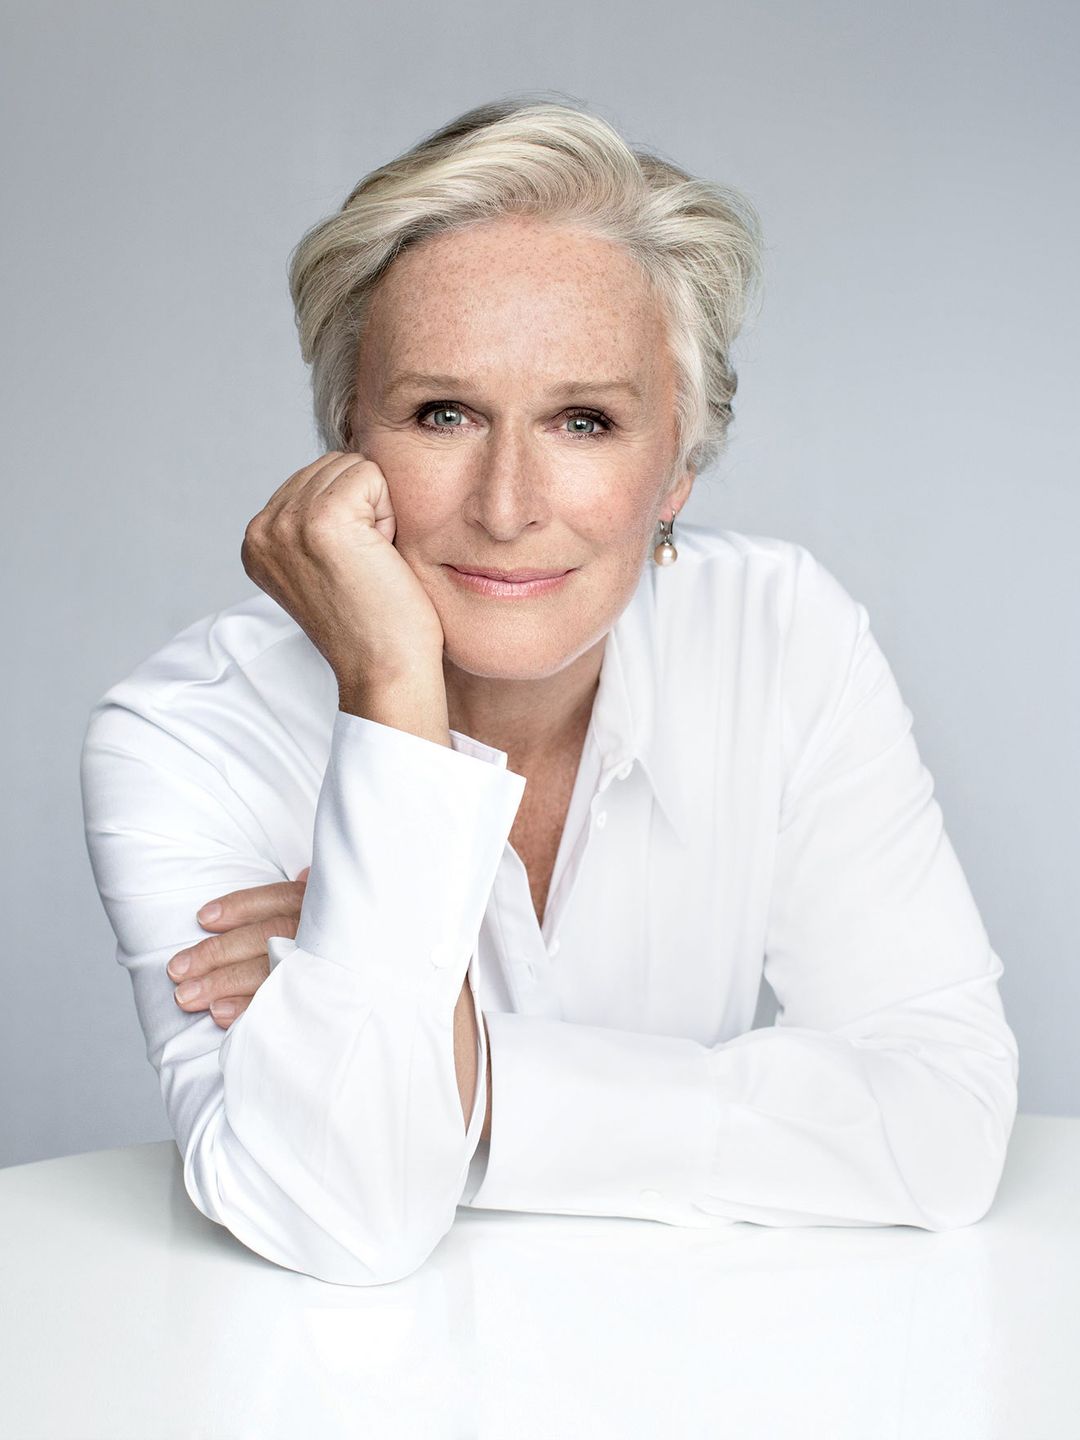 Glenn Close who are her parents